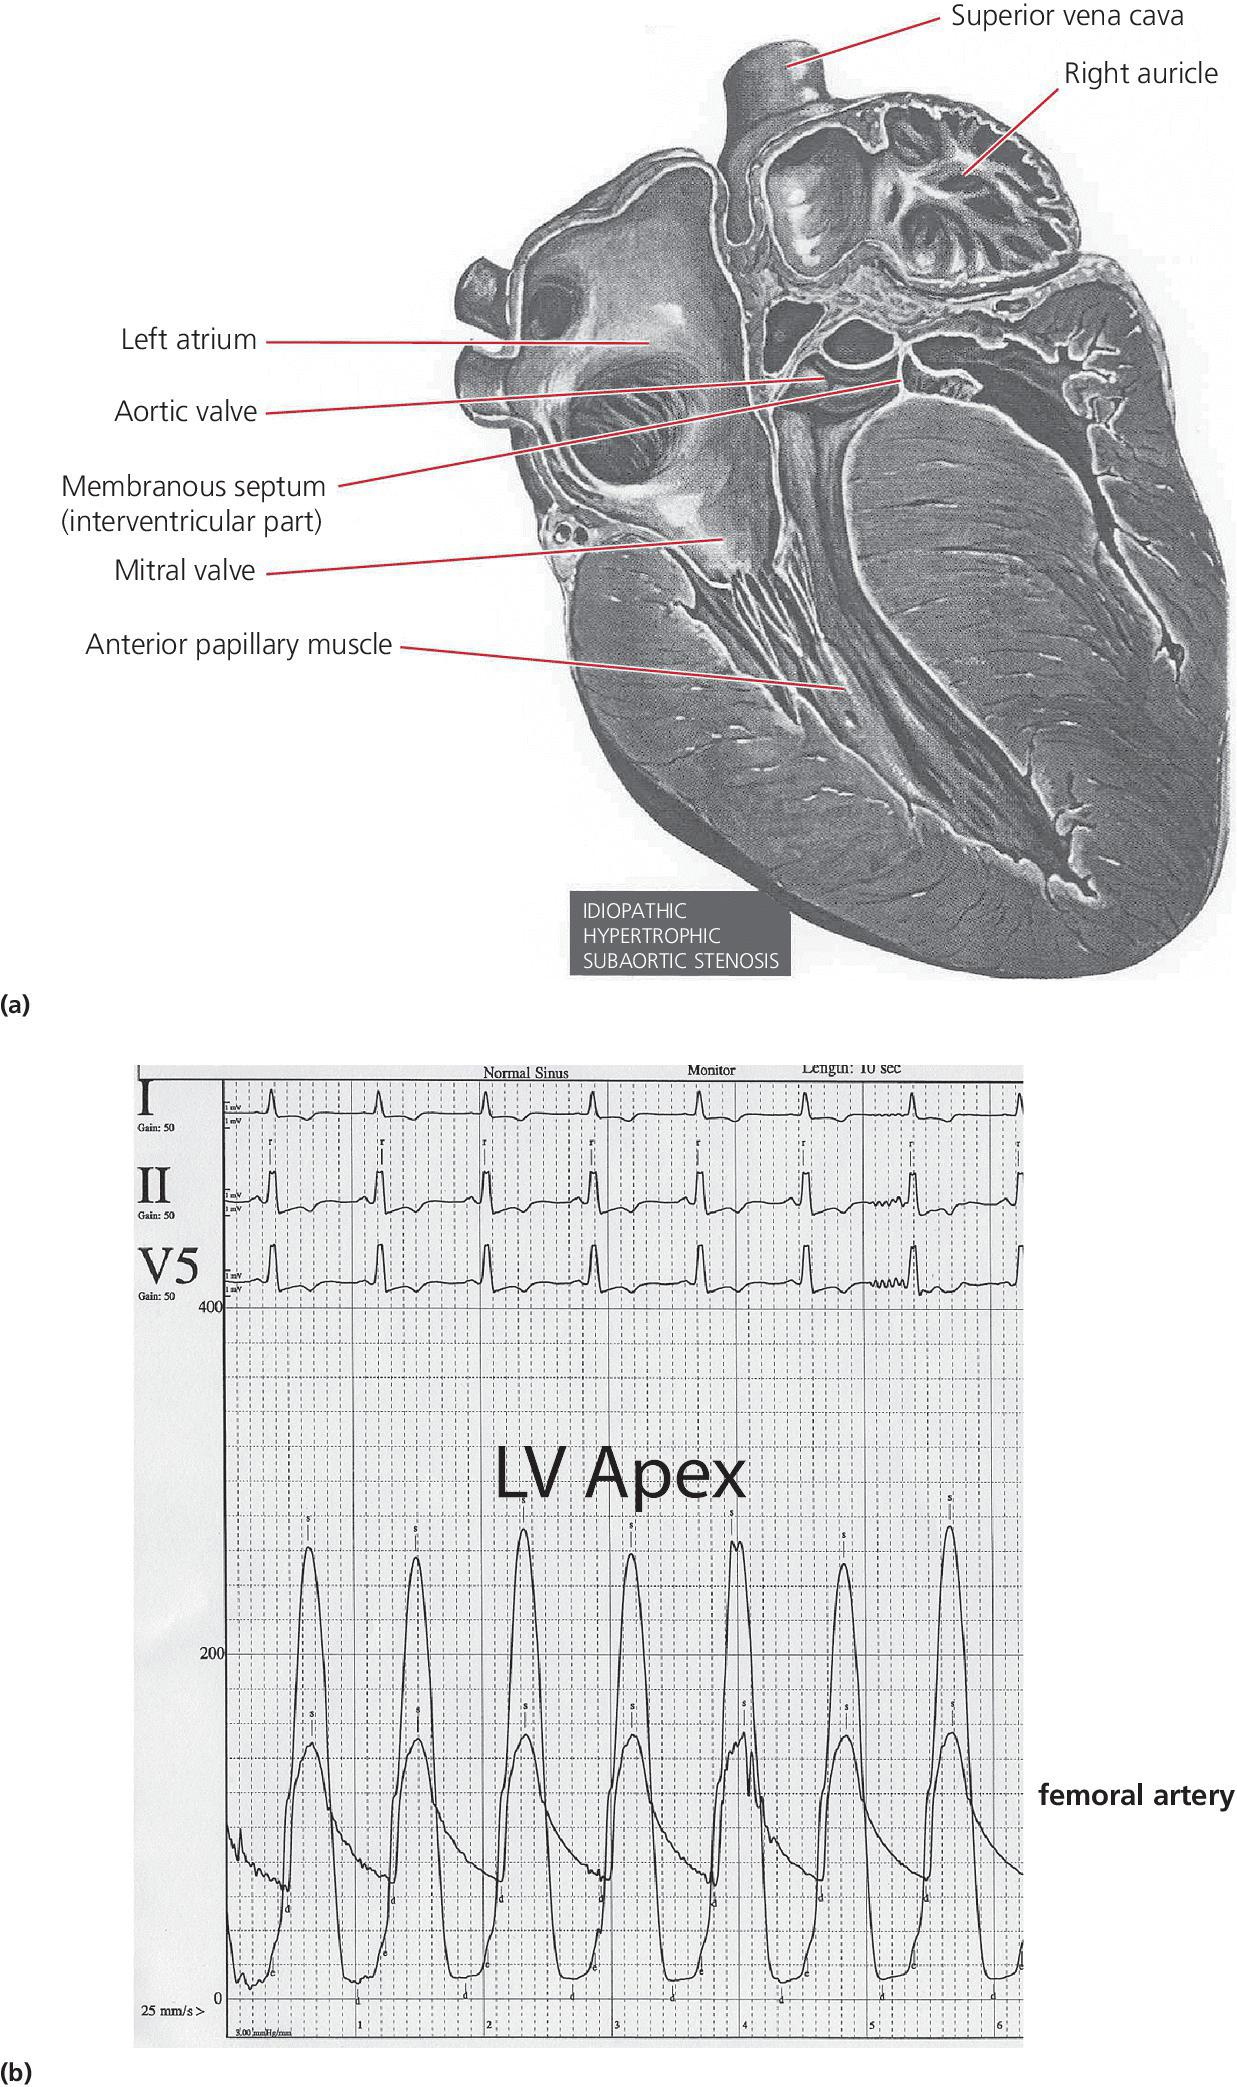 Top: Illustration of the heart with labels superior vena cava, right auricle, left atrium, aortic valve, etc. Bottom: Electrocardiogram displaying waveforms labeled LV Apex and femoral artery.